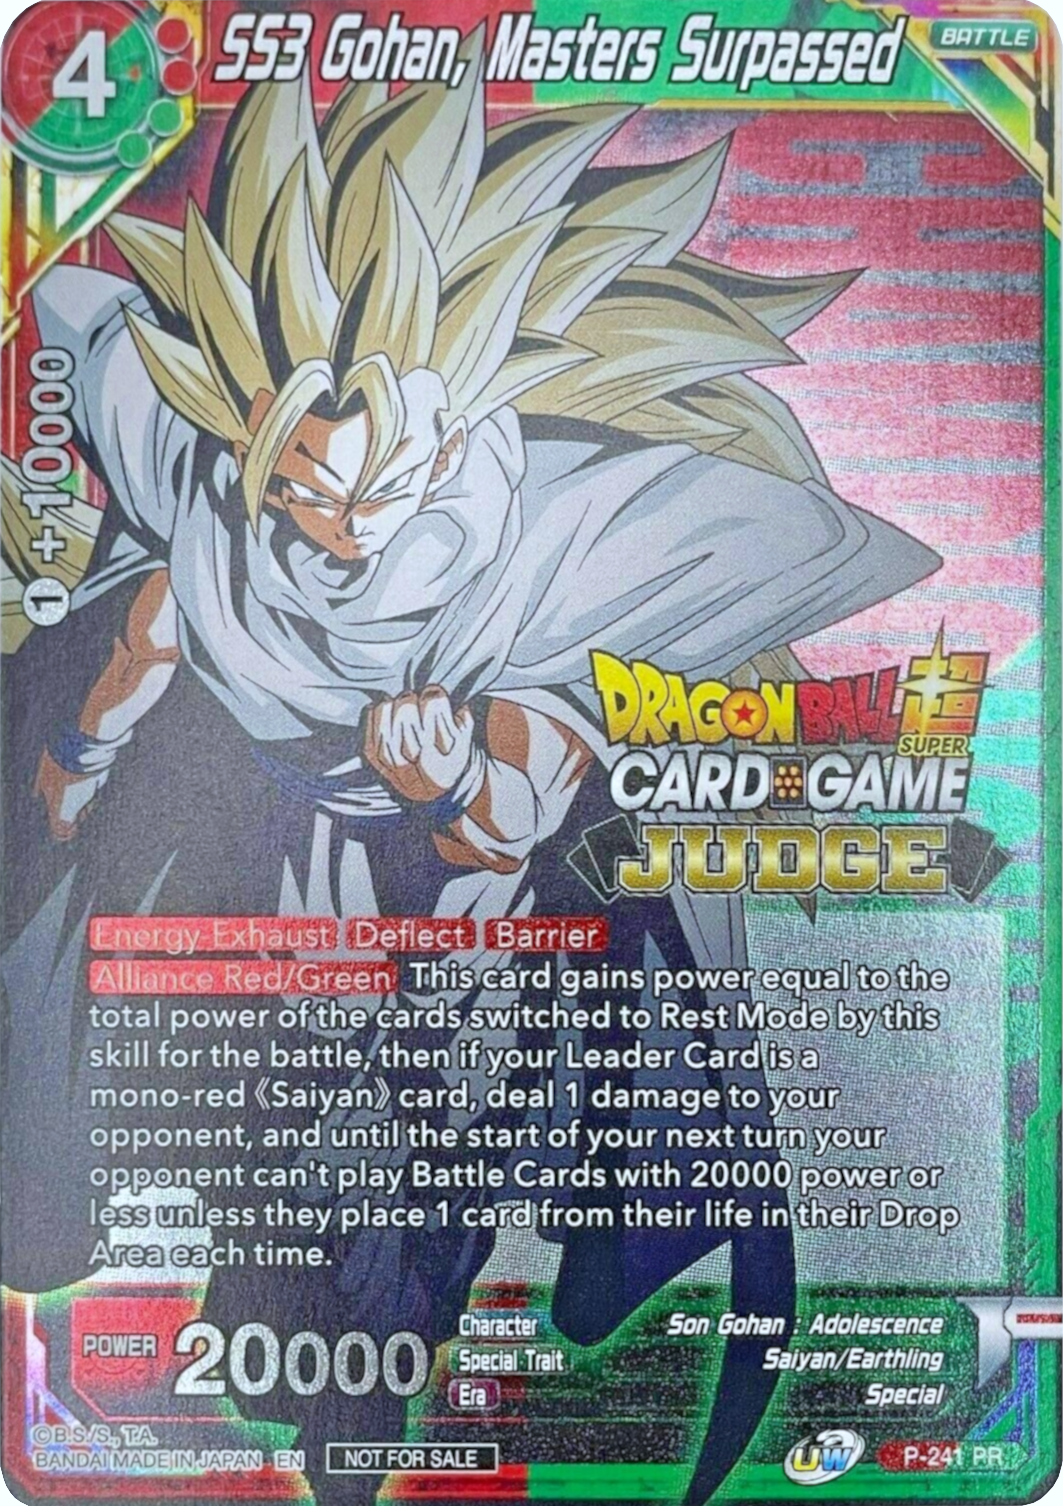 SS3 Gohan, Masters Surpassed (Level 2) (P-241) [Promotion Cards] | Amazing Games TCG